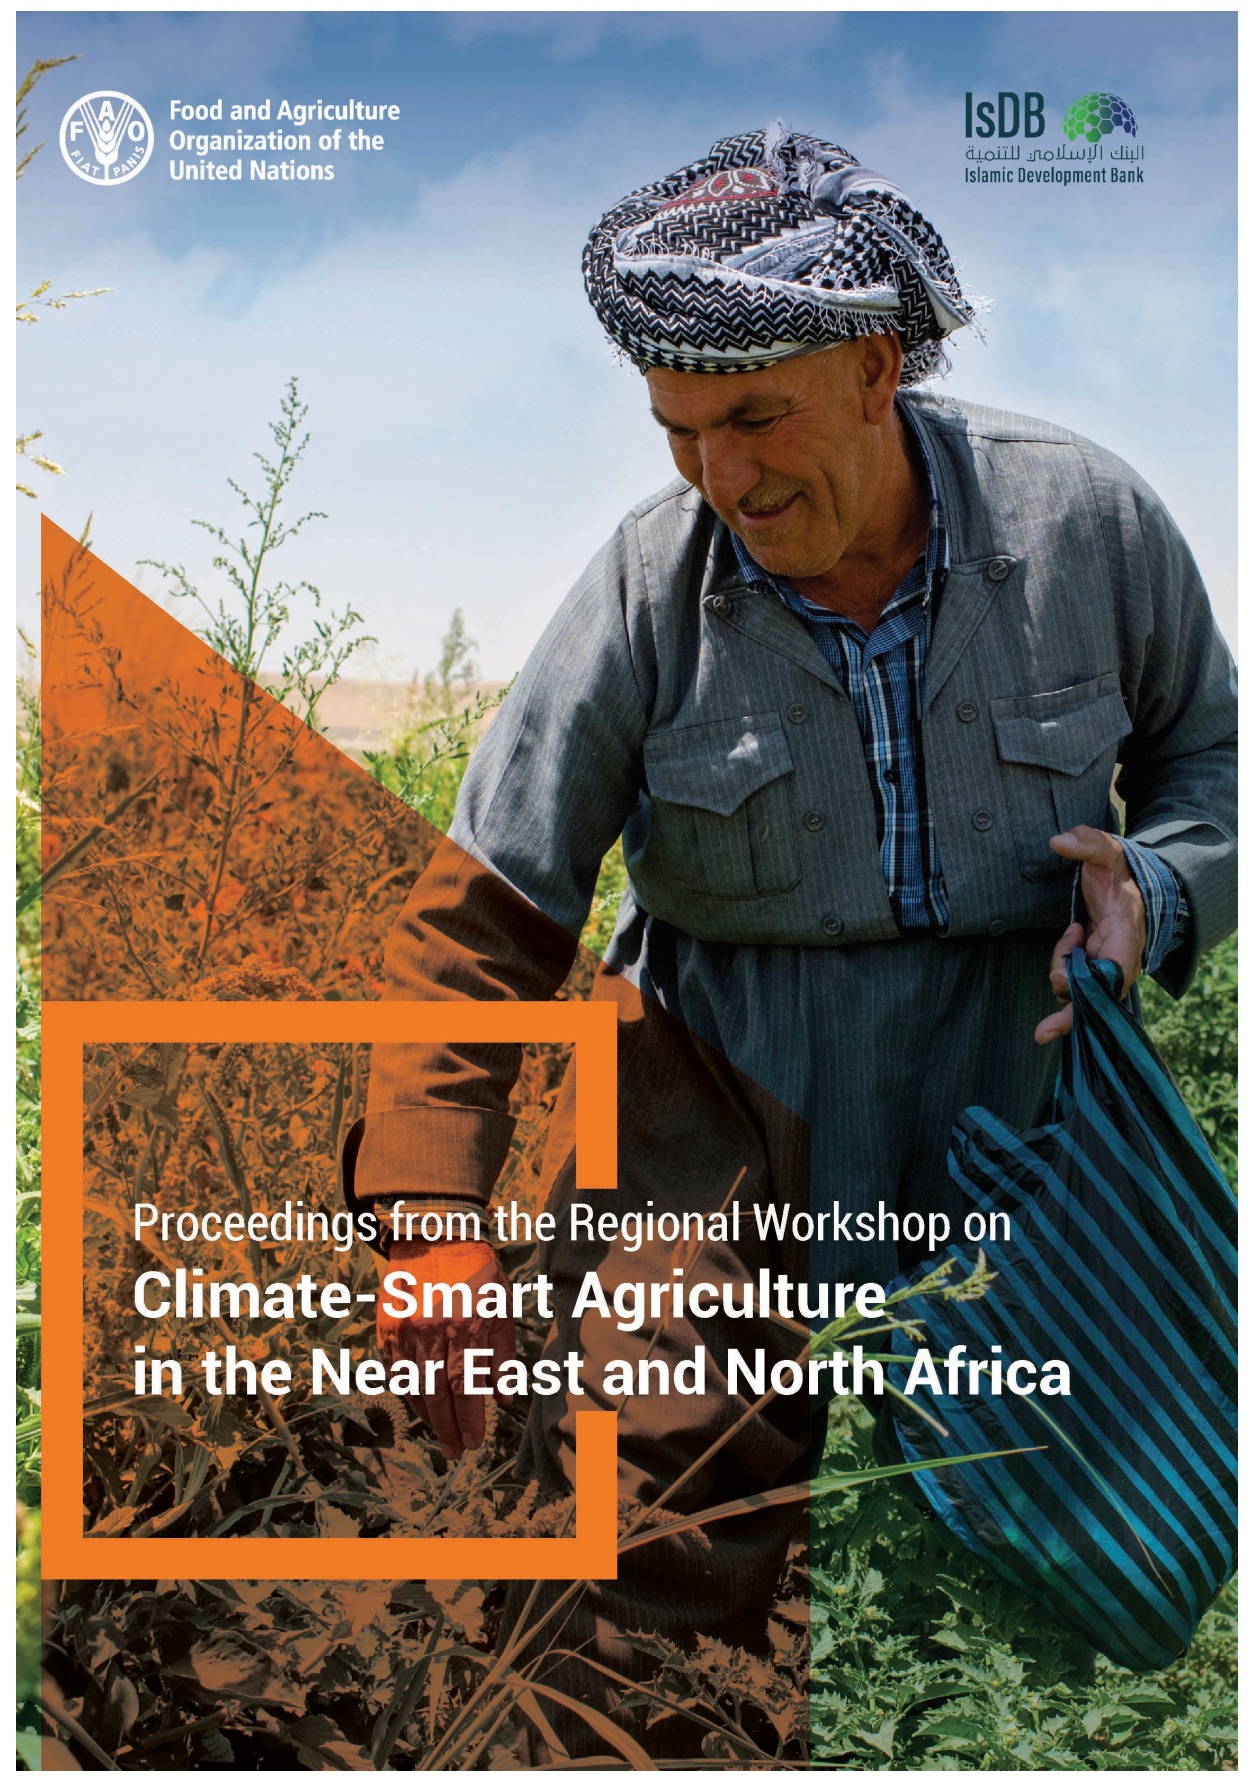 Proceedings of the regional workshop on climate-smart agriculture in the Near East and North Africa